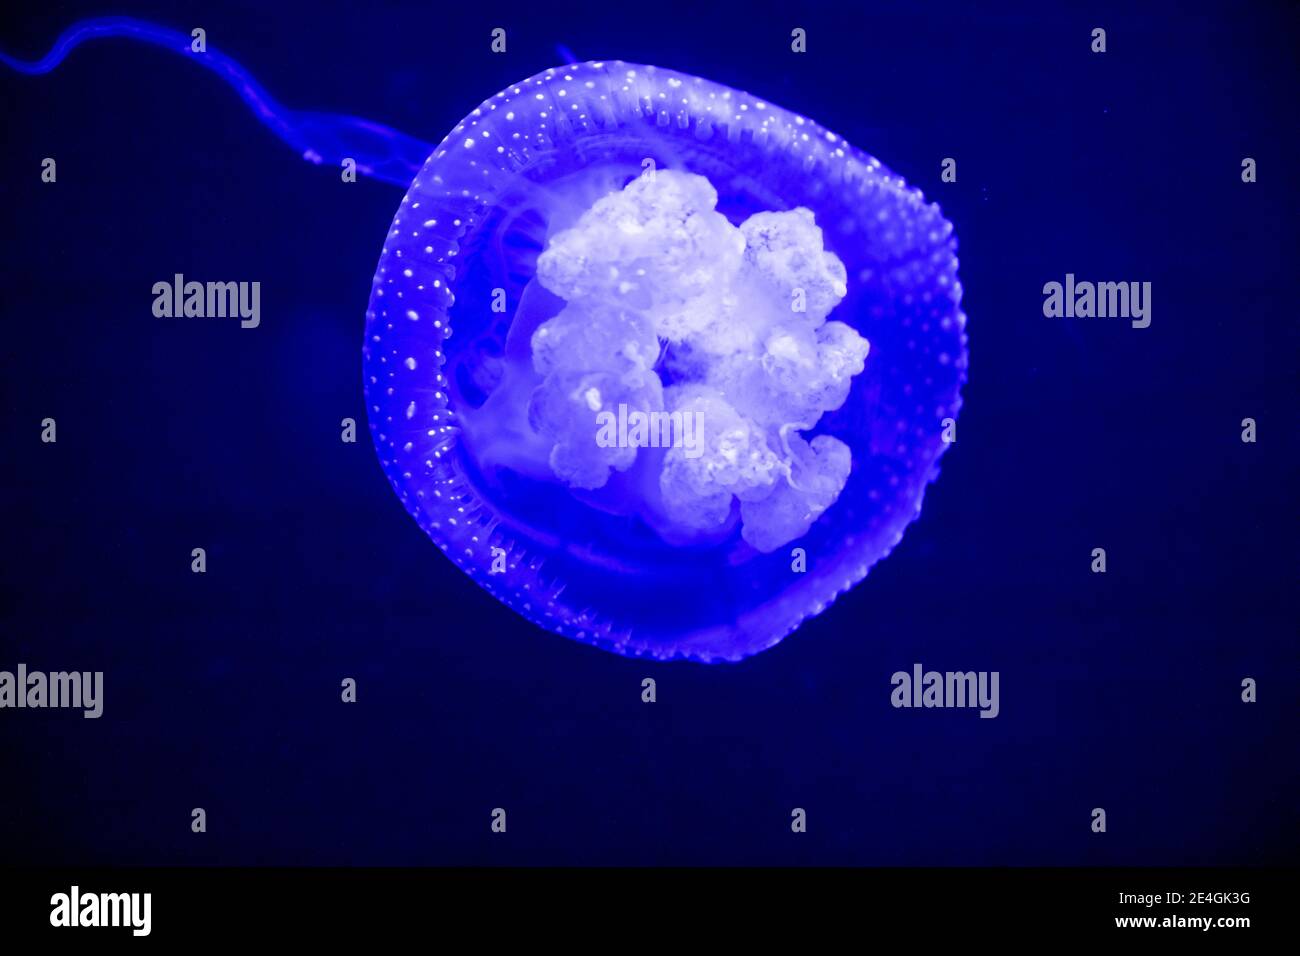 Phyllorhiza punctata (floating bell, Australian spotted jellyfish, brown jellyfish or the white-spotted jellyfish) swimming in the water, on black bac Stock Photo